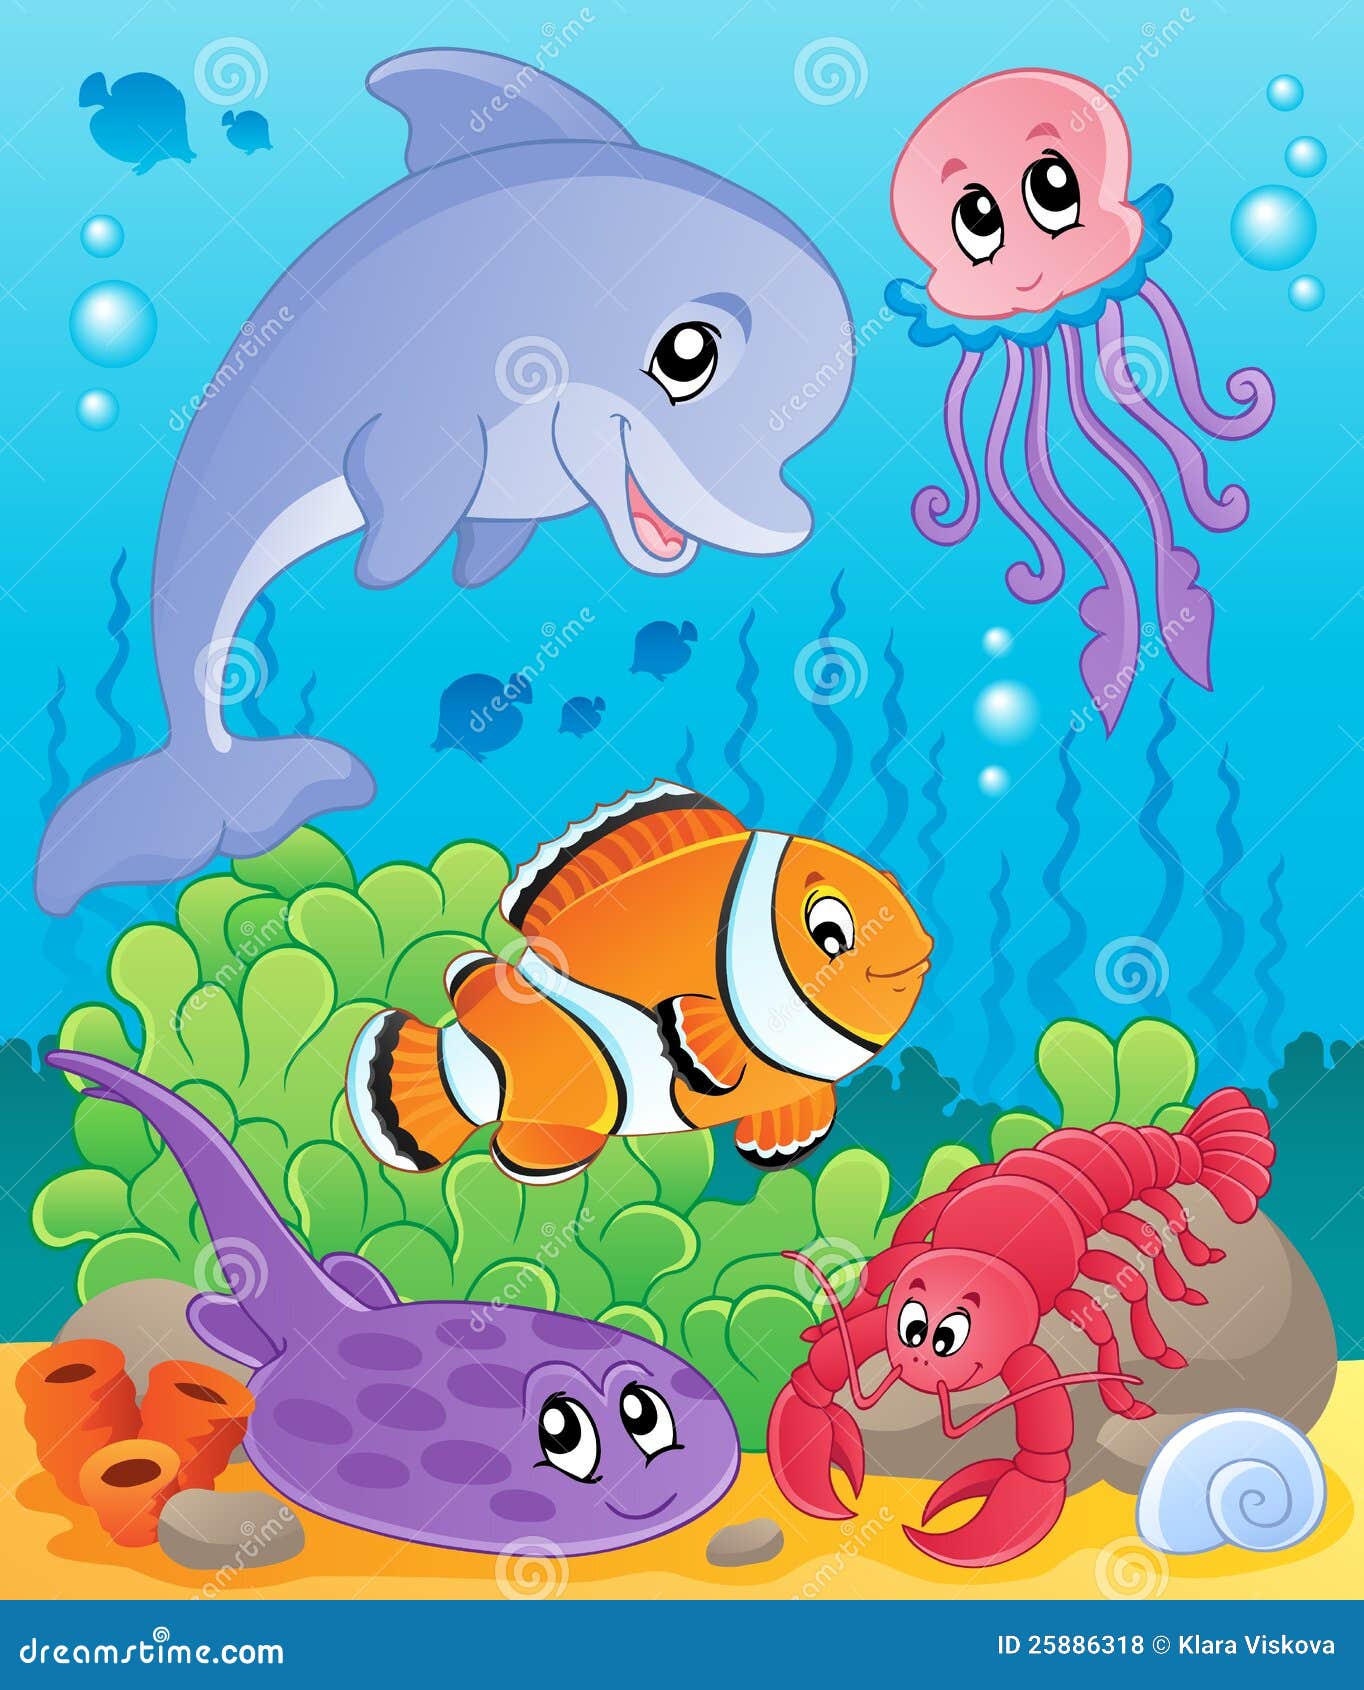 image with undersea theme